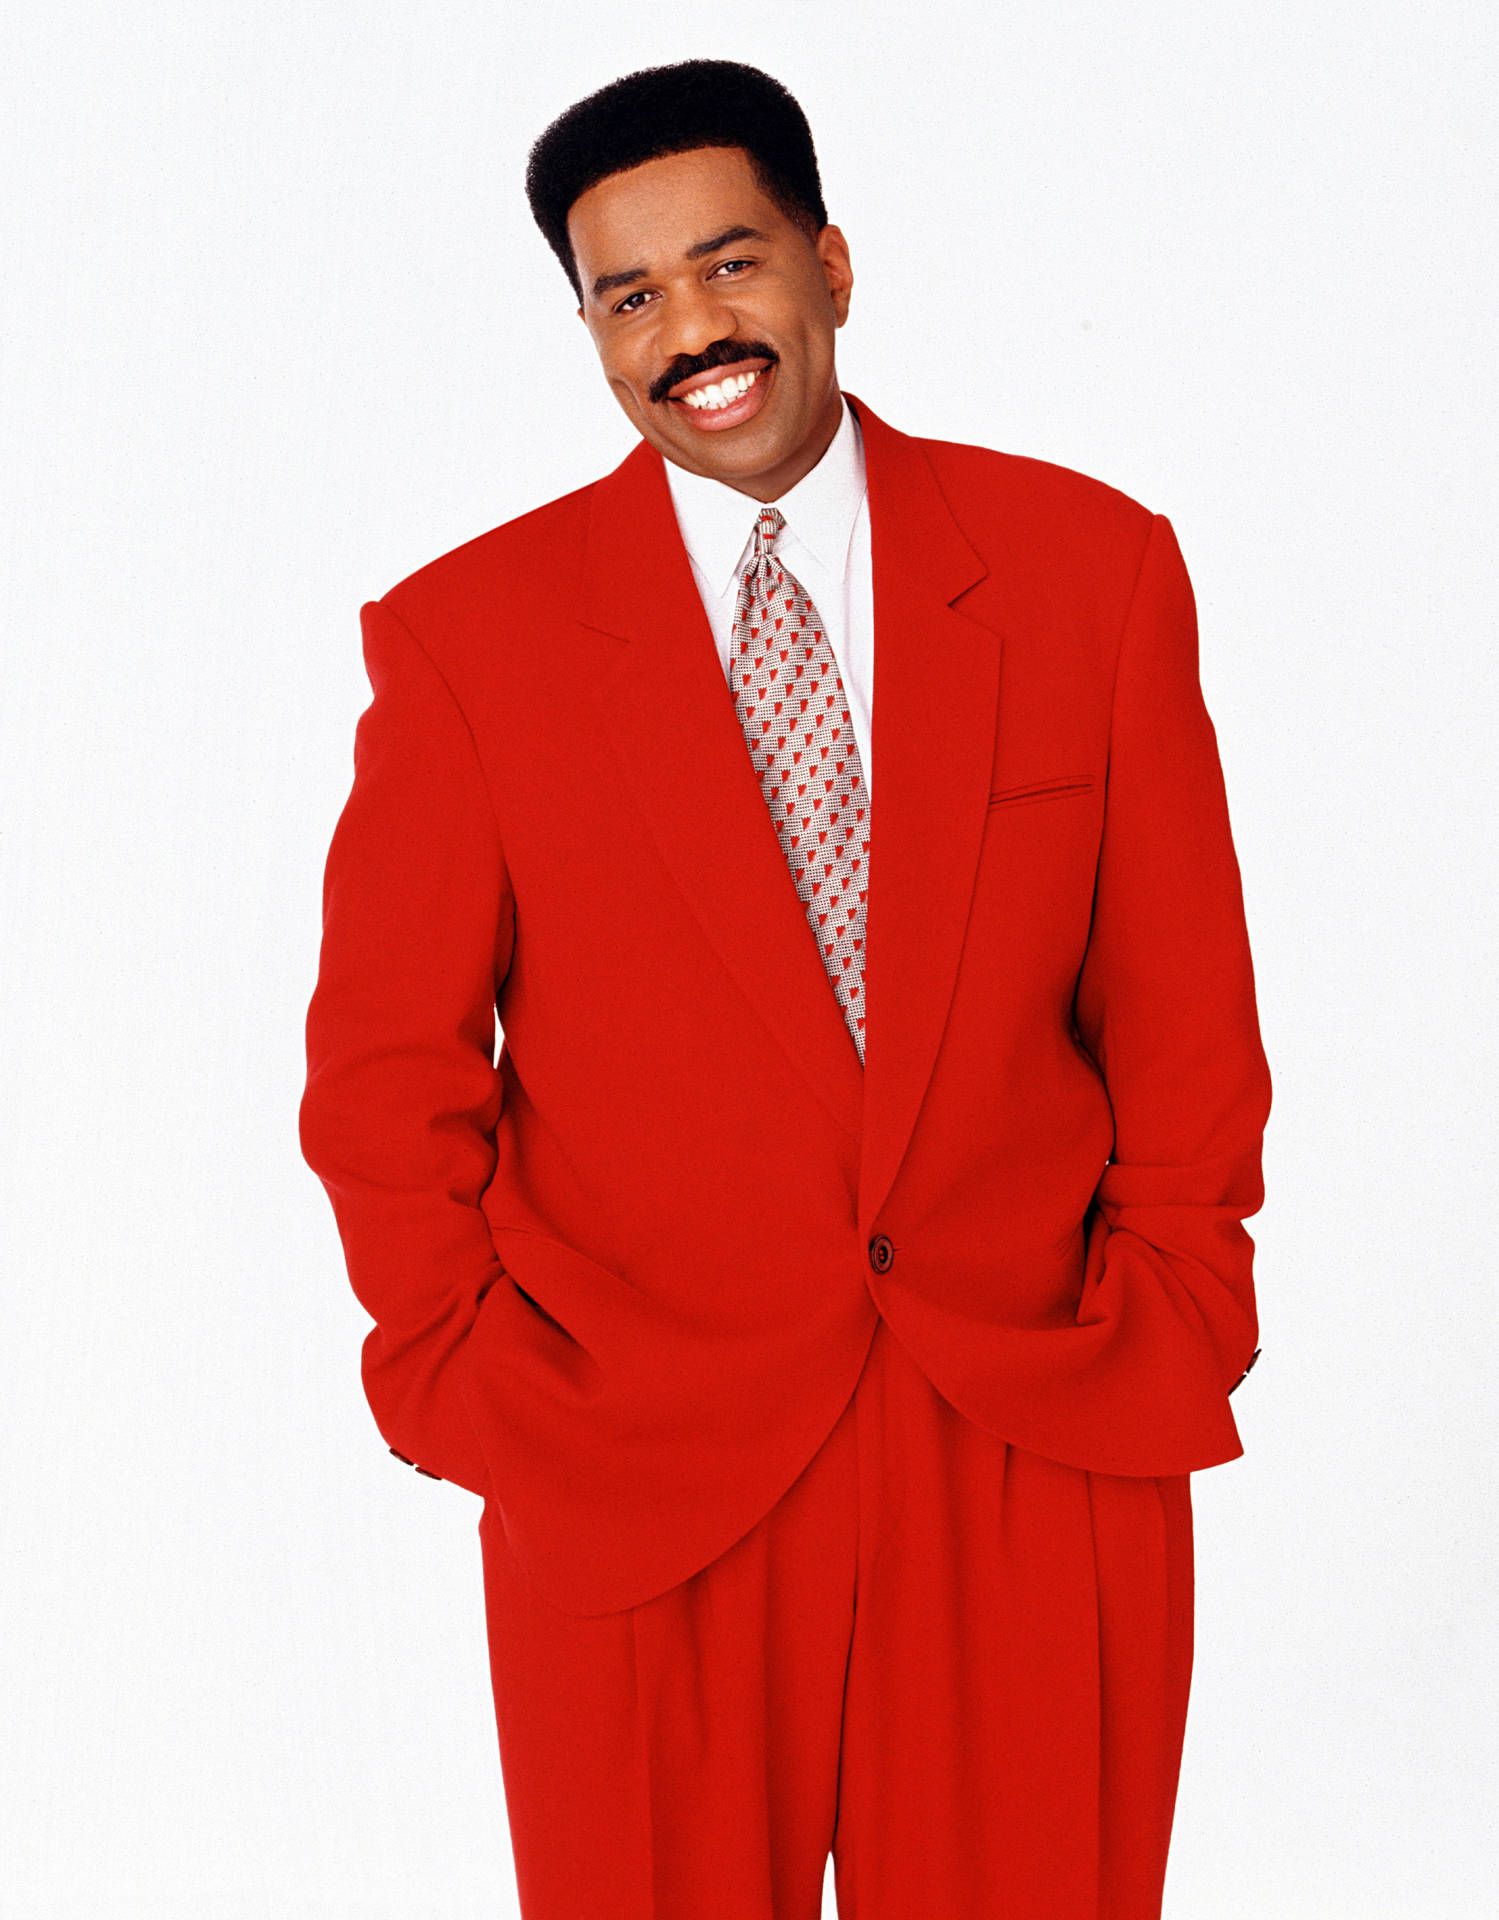 Steve Harvey Smiling In A Red Suit Background